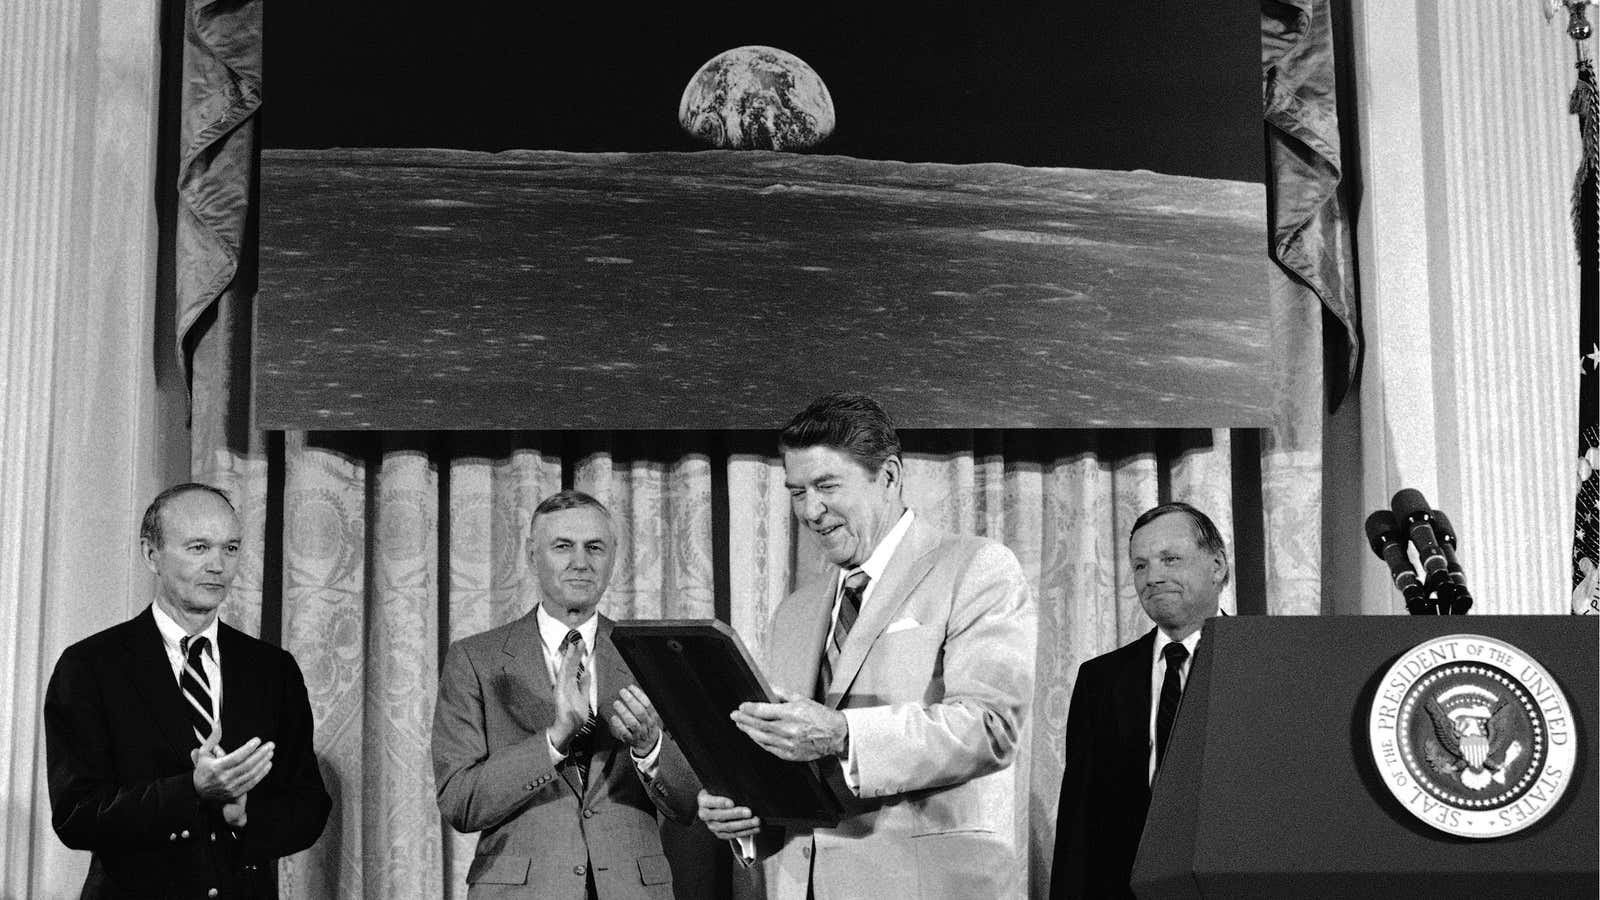 Ronald Reagan celebrates the fifteenth anniversary of the moon landing in 1984.